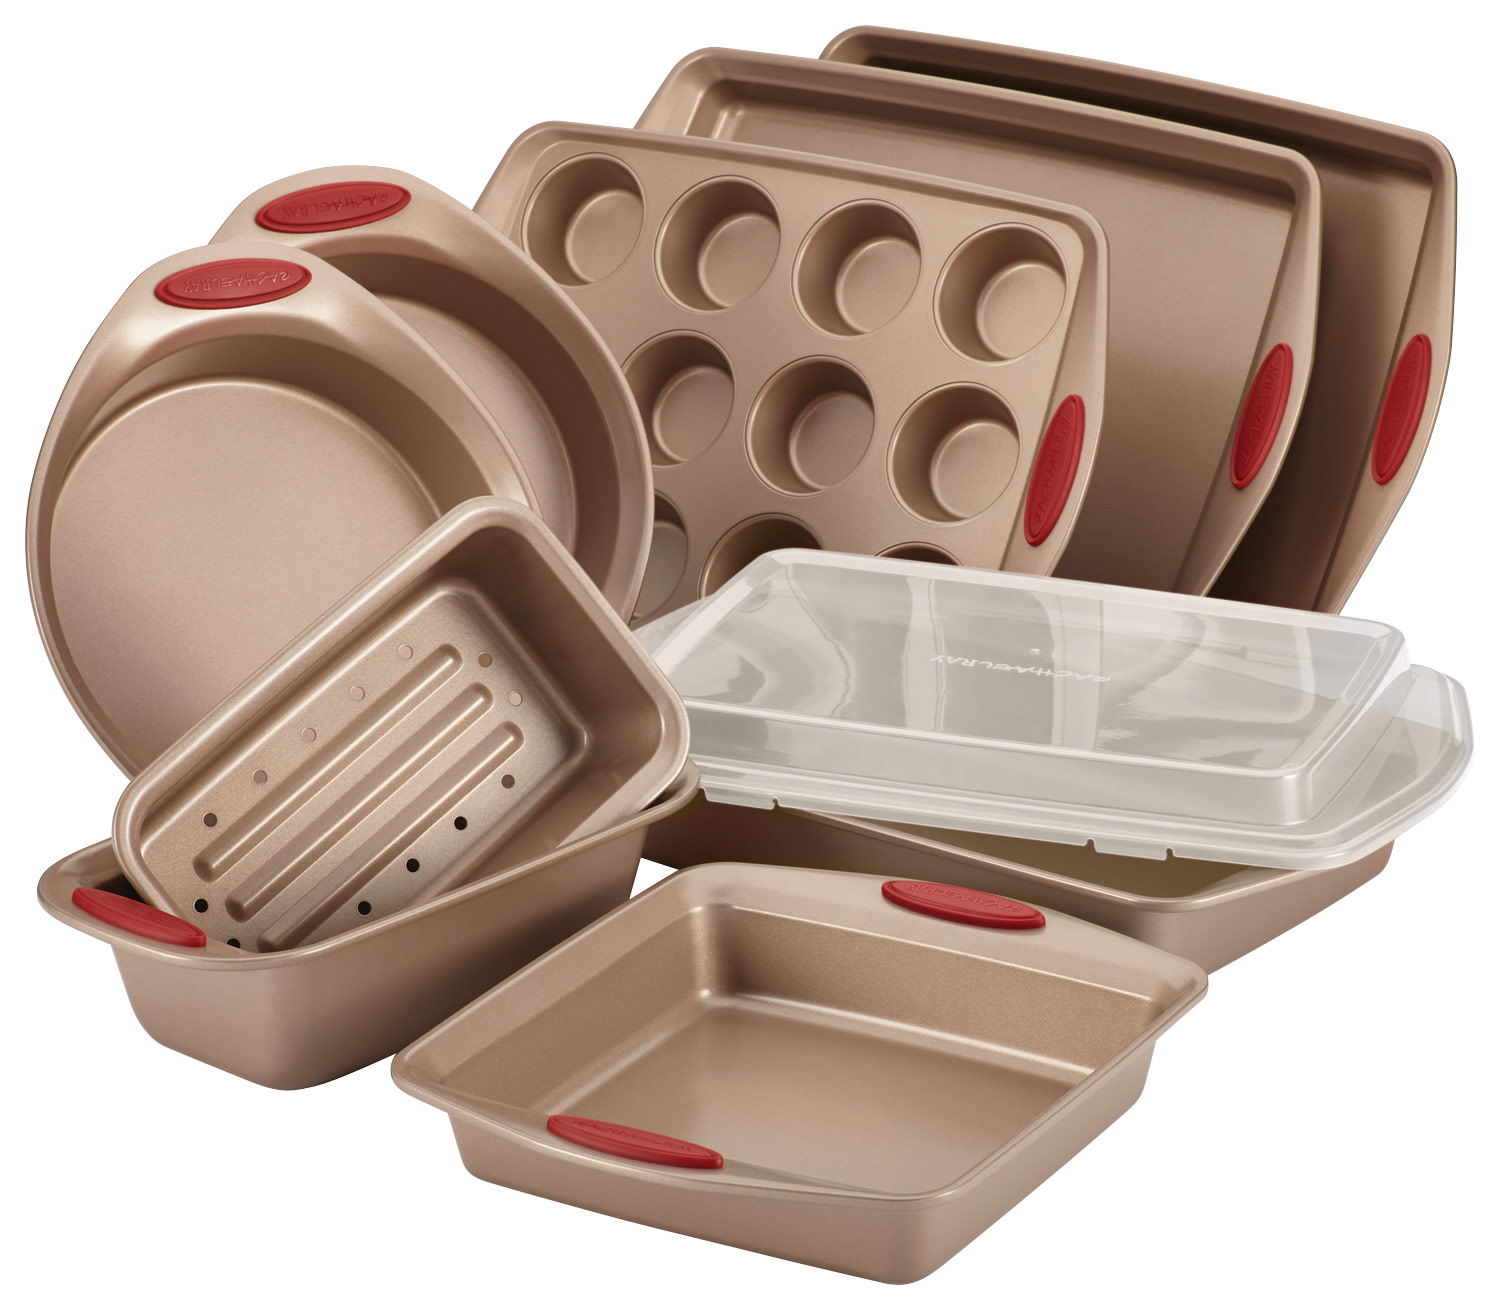 Angle View: Rachael Ray - Cucina 10-Piece Nonstick Bakeware Set - Latte Brown/Cranberry Red